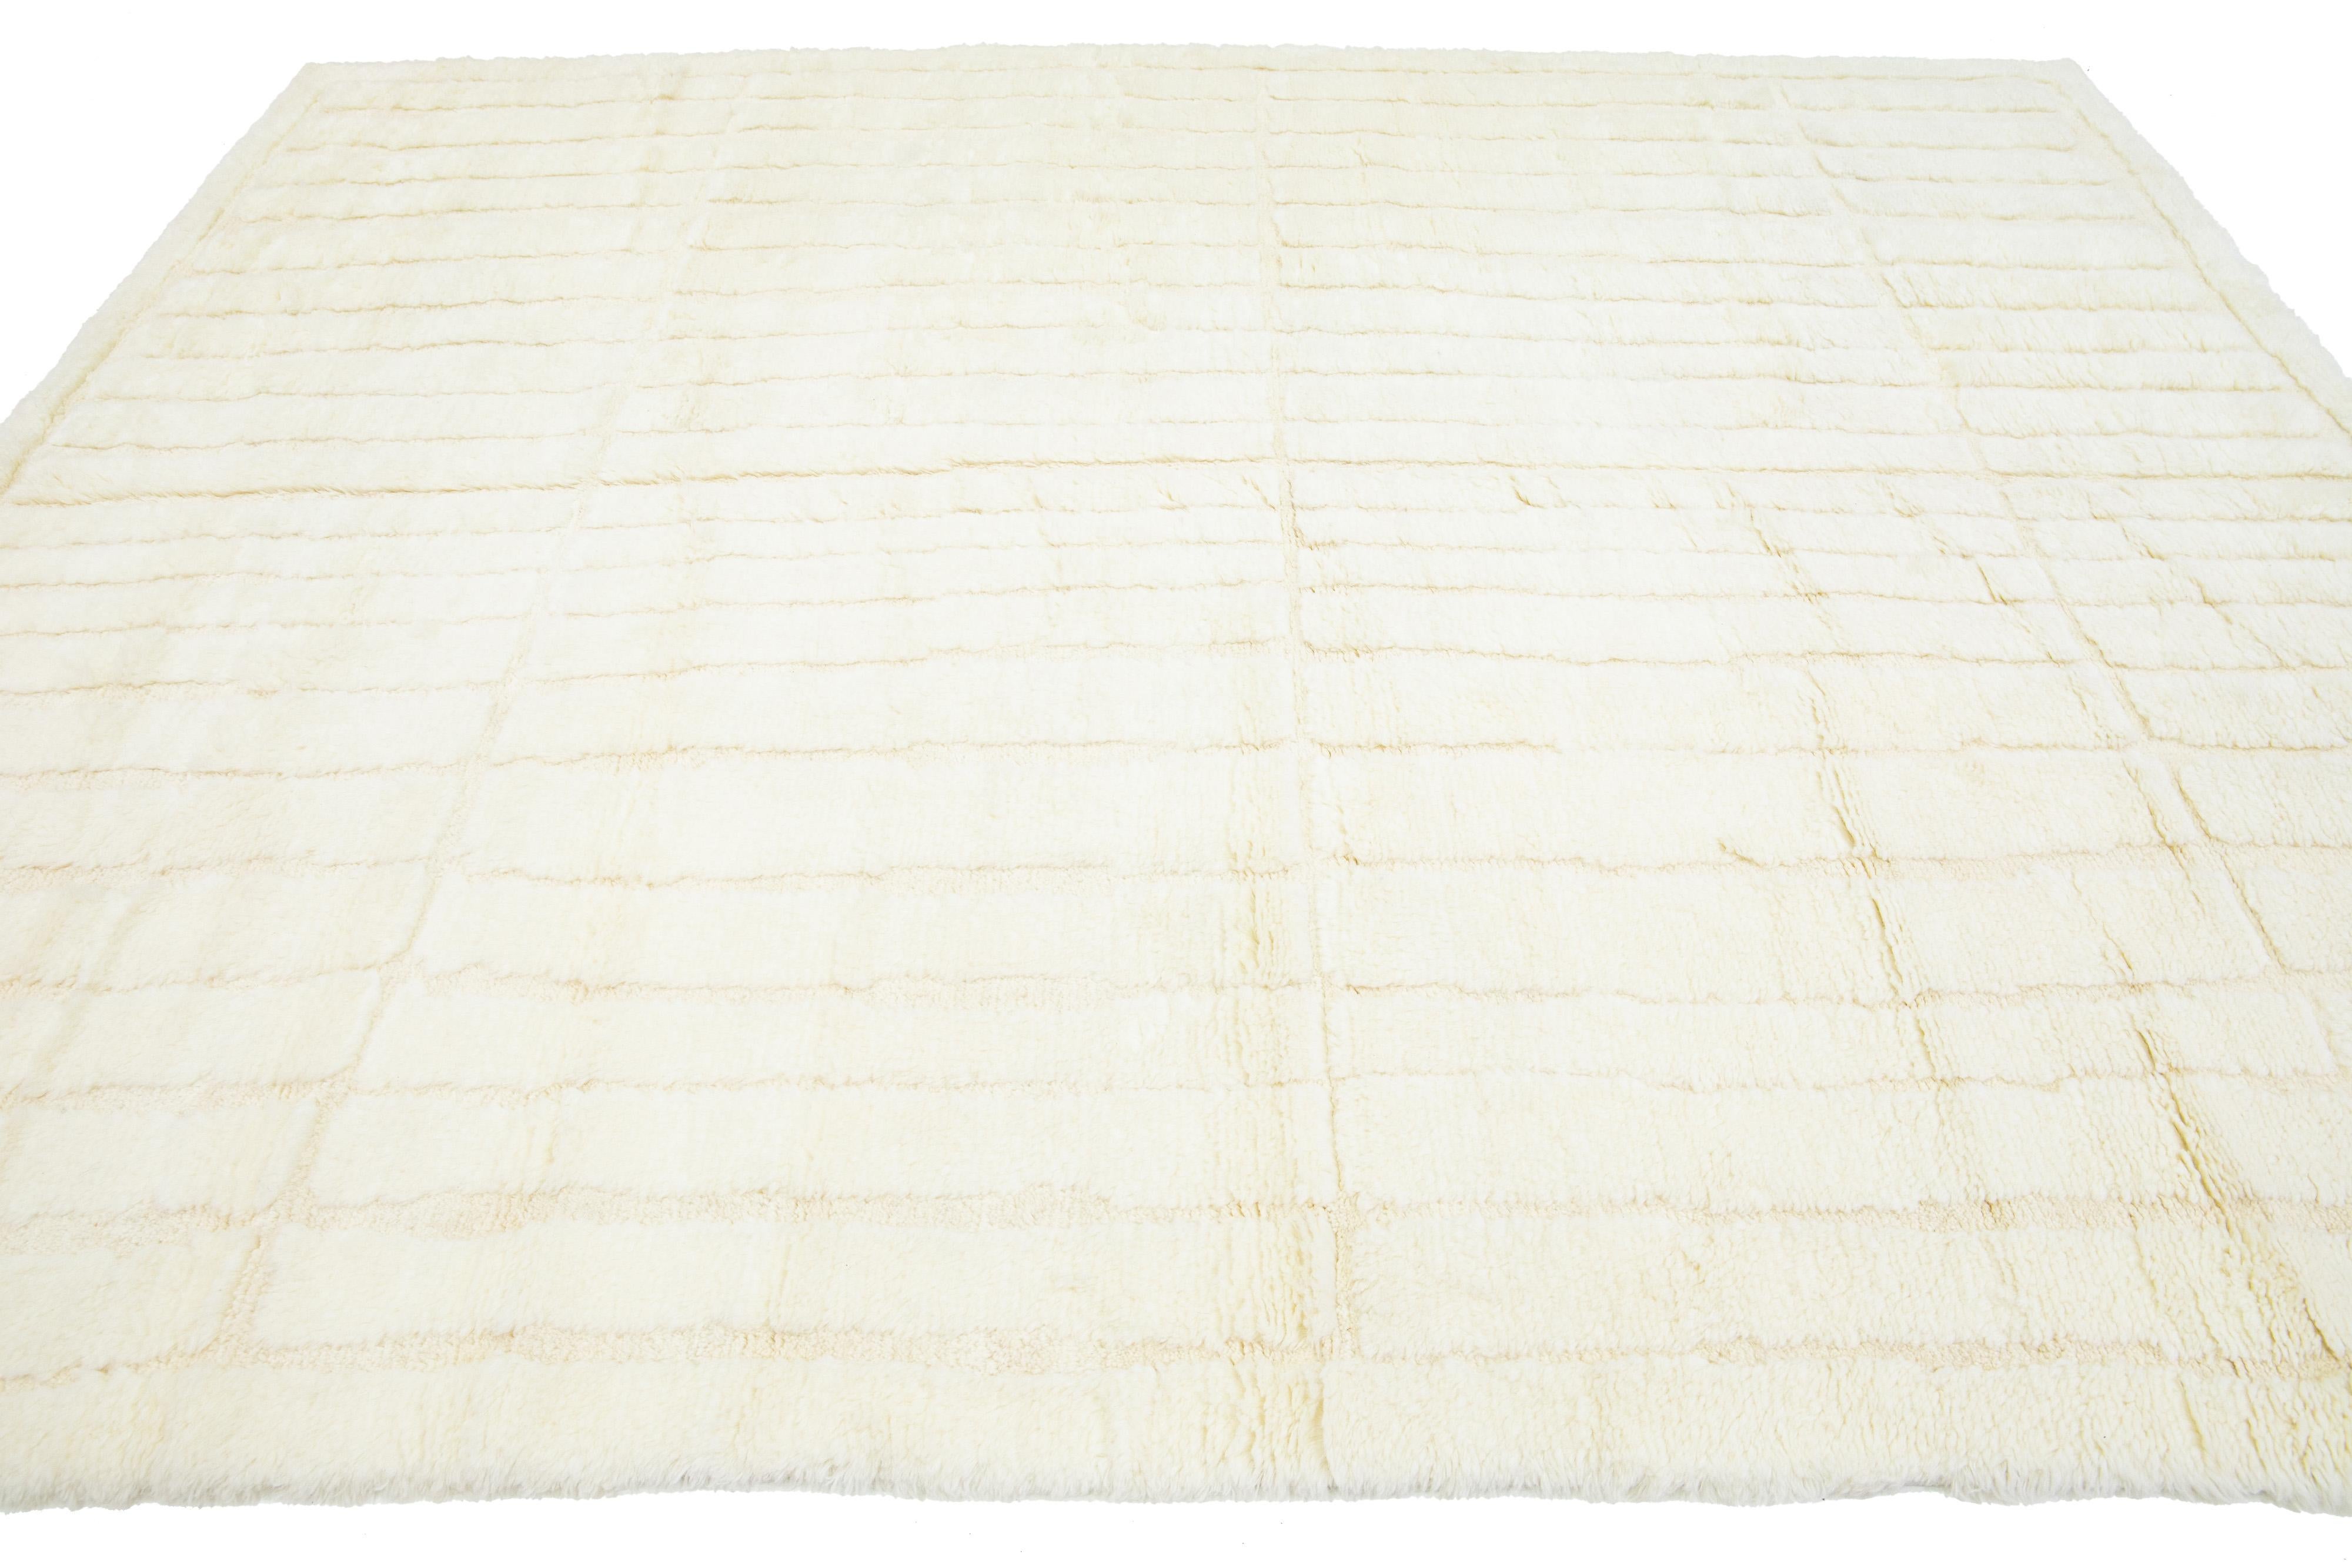 Contemporary Modern Handmade Moroccan-Style Wool Rug In Natural Ivory Color by Apadana For Sale